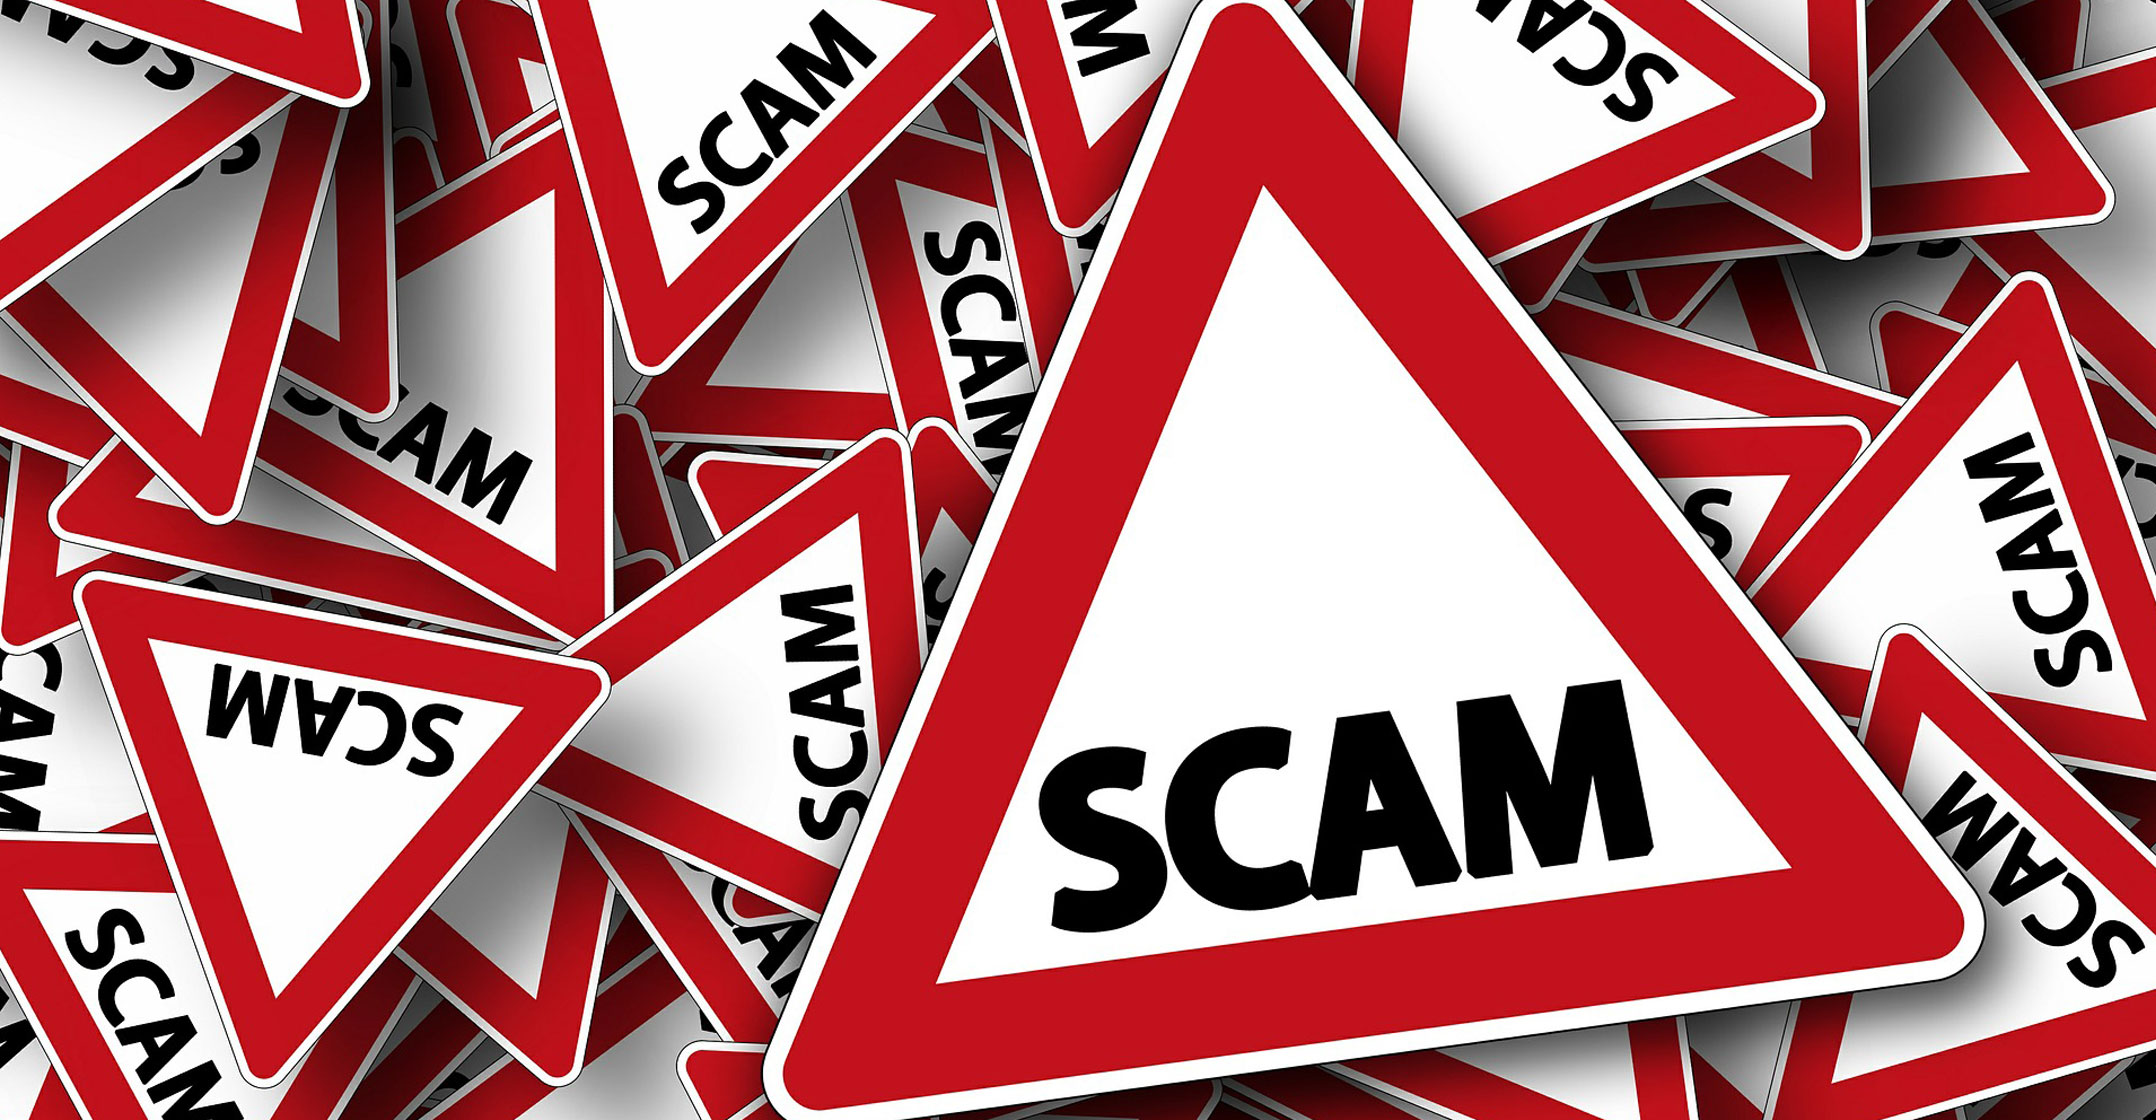 South Africa's MTI was world's biggest crypto scam in 2020 ...